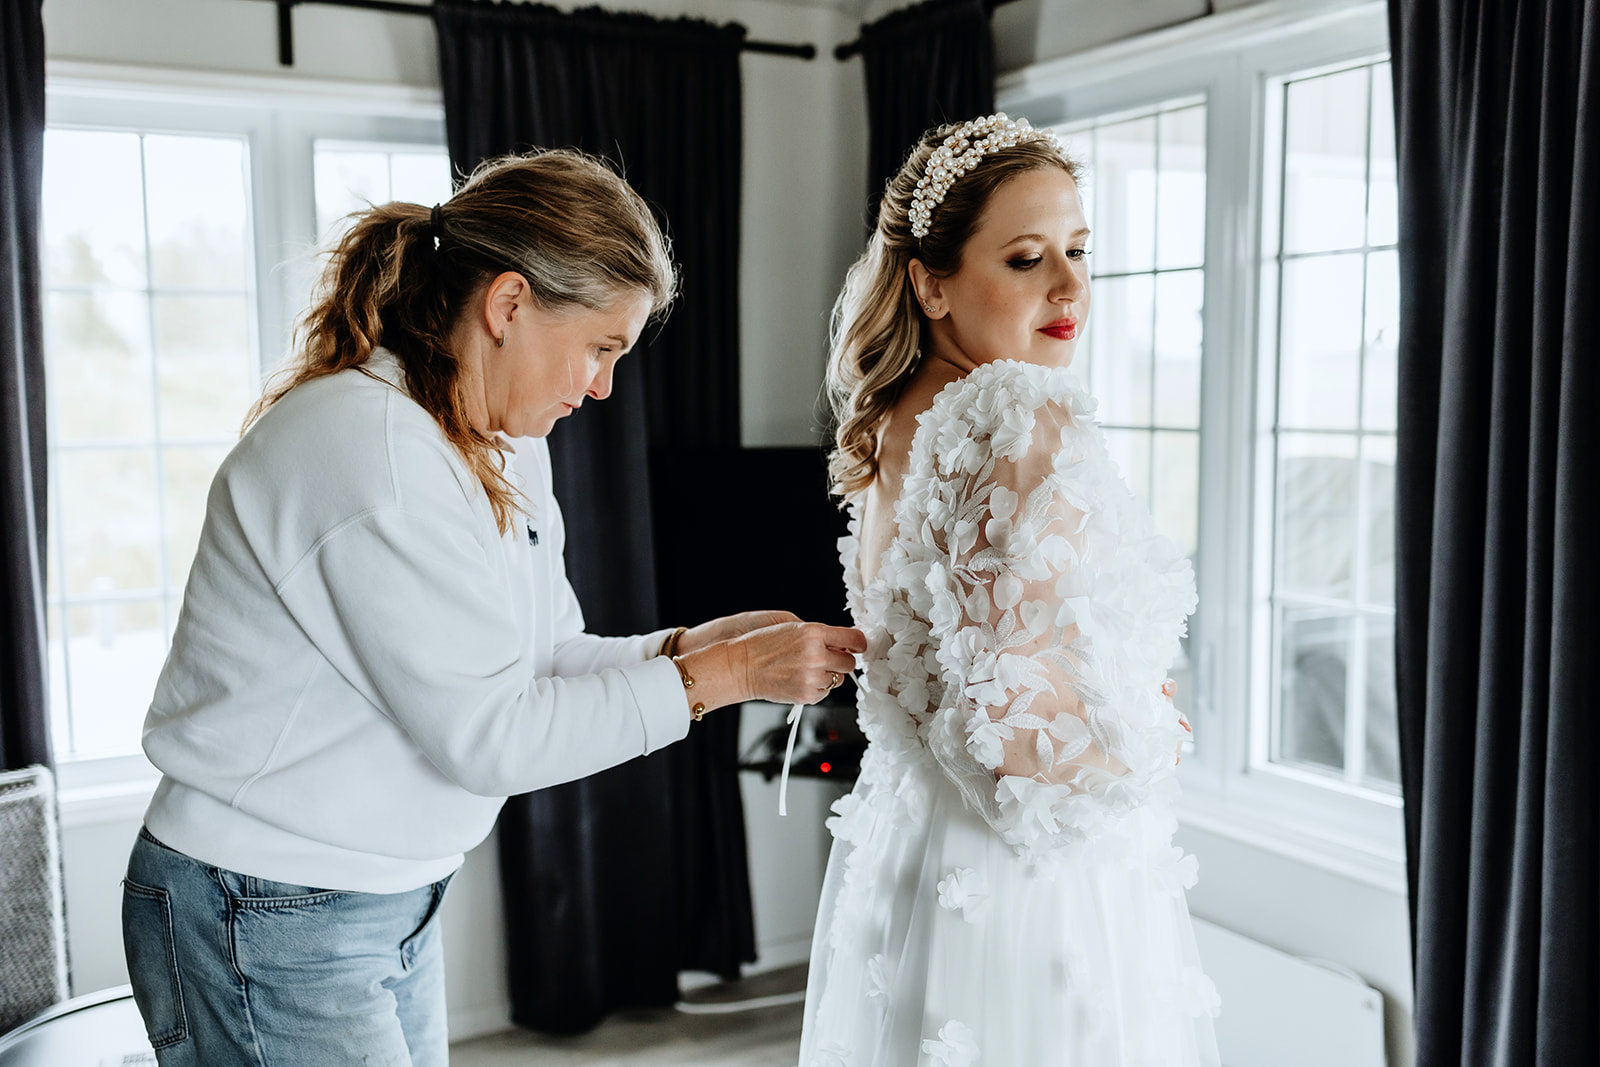 Bride is getting ready and putting her wedding dress on with the help of her makeup artist in Iceland.